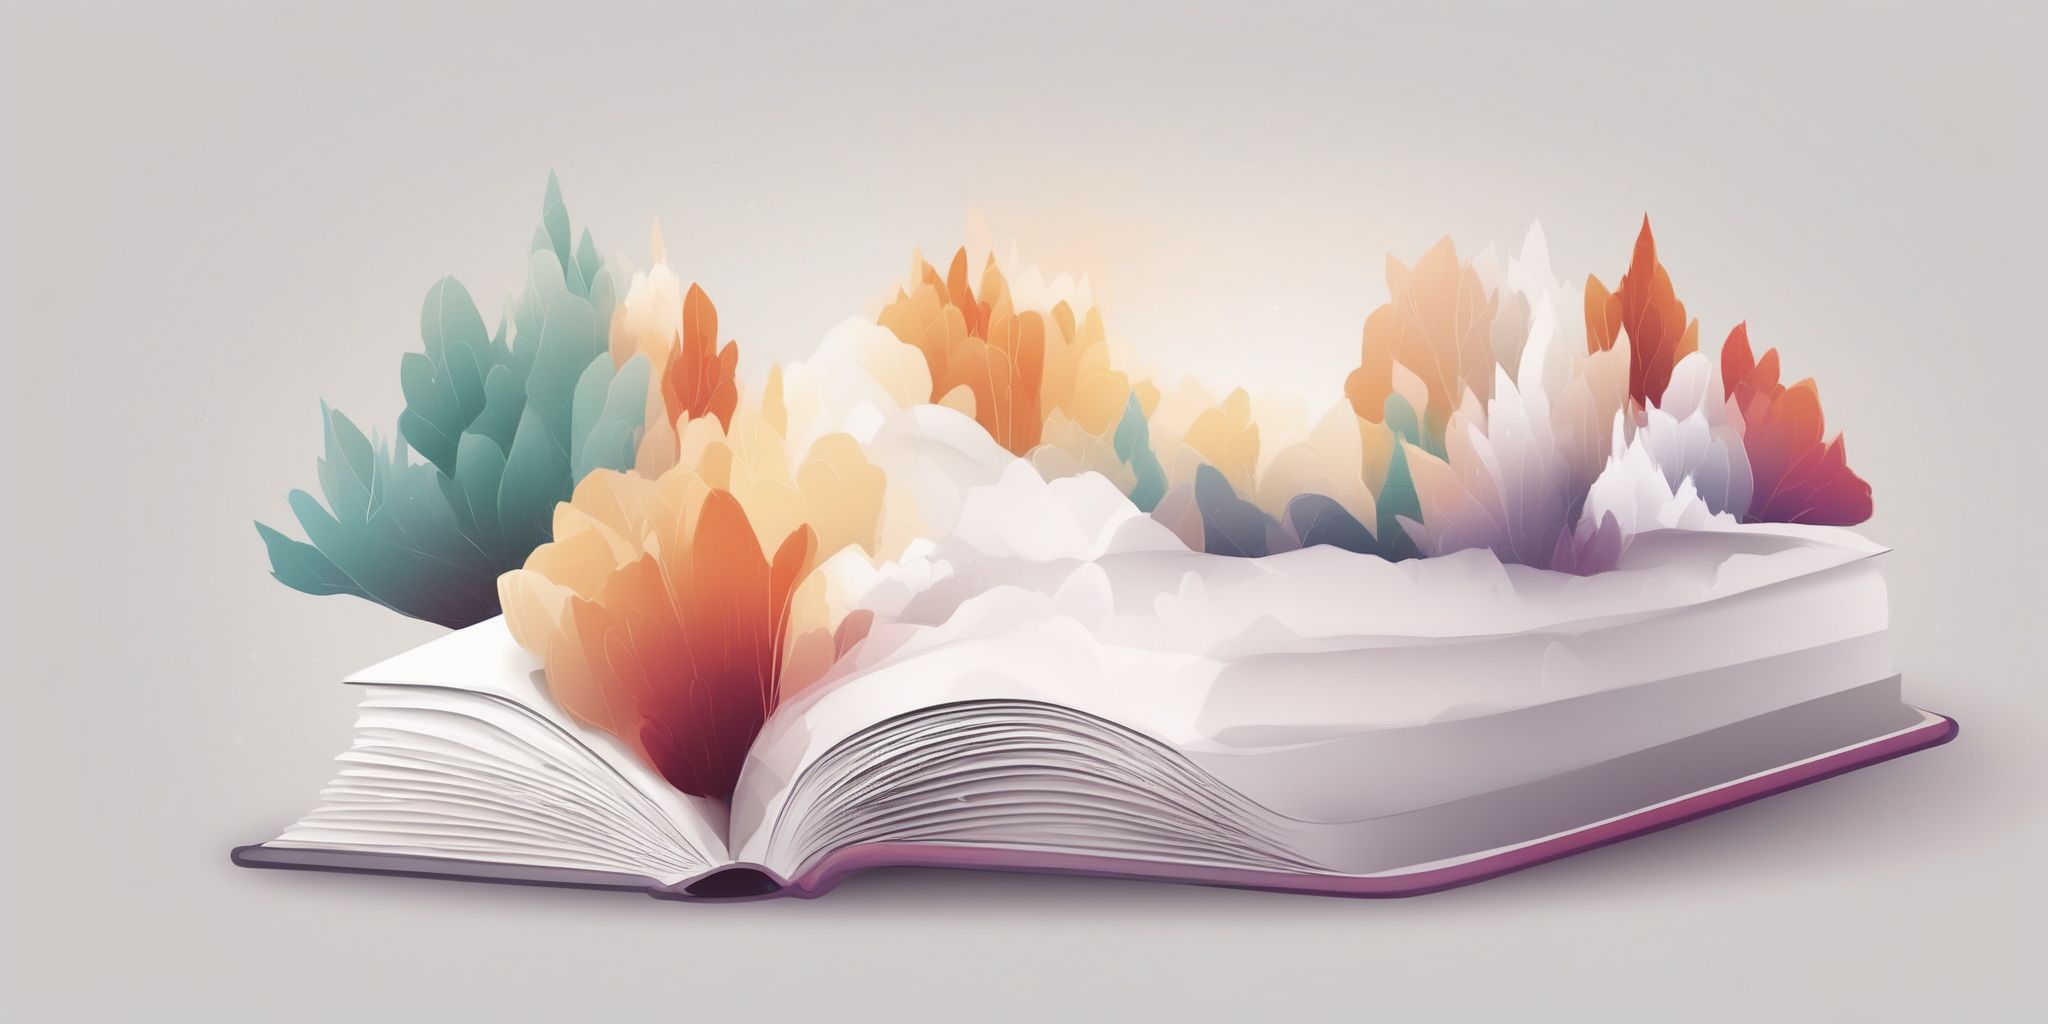 book in illustration style with gradients and white background